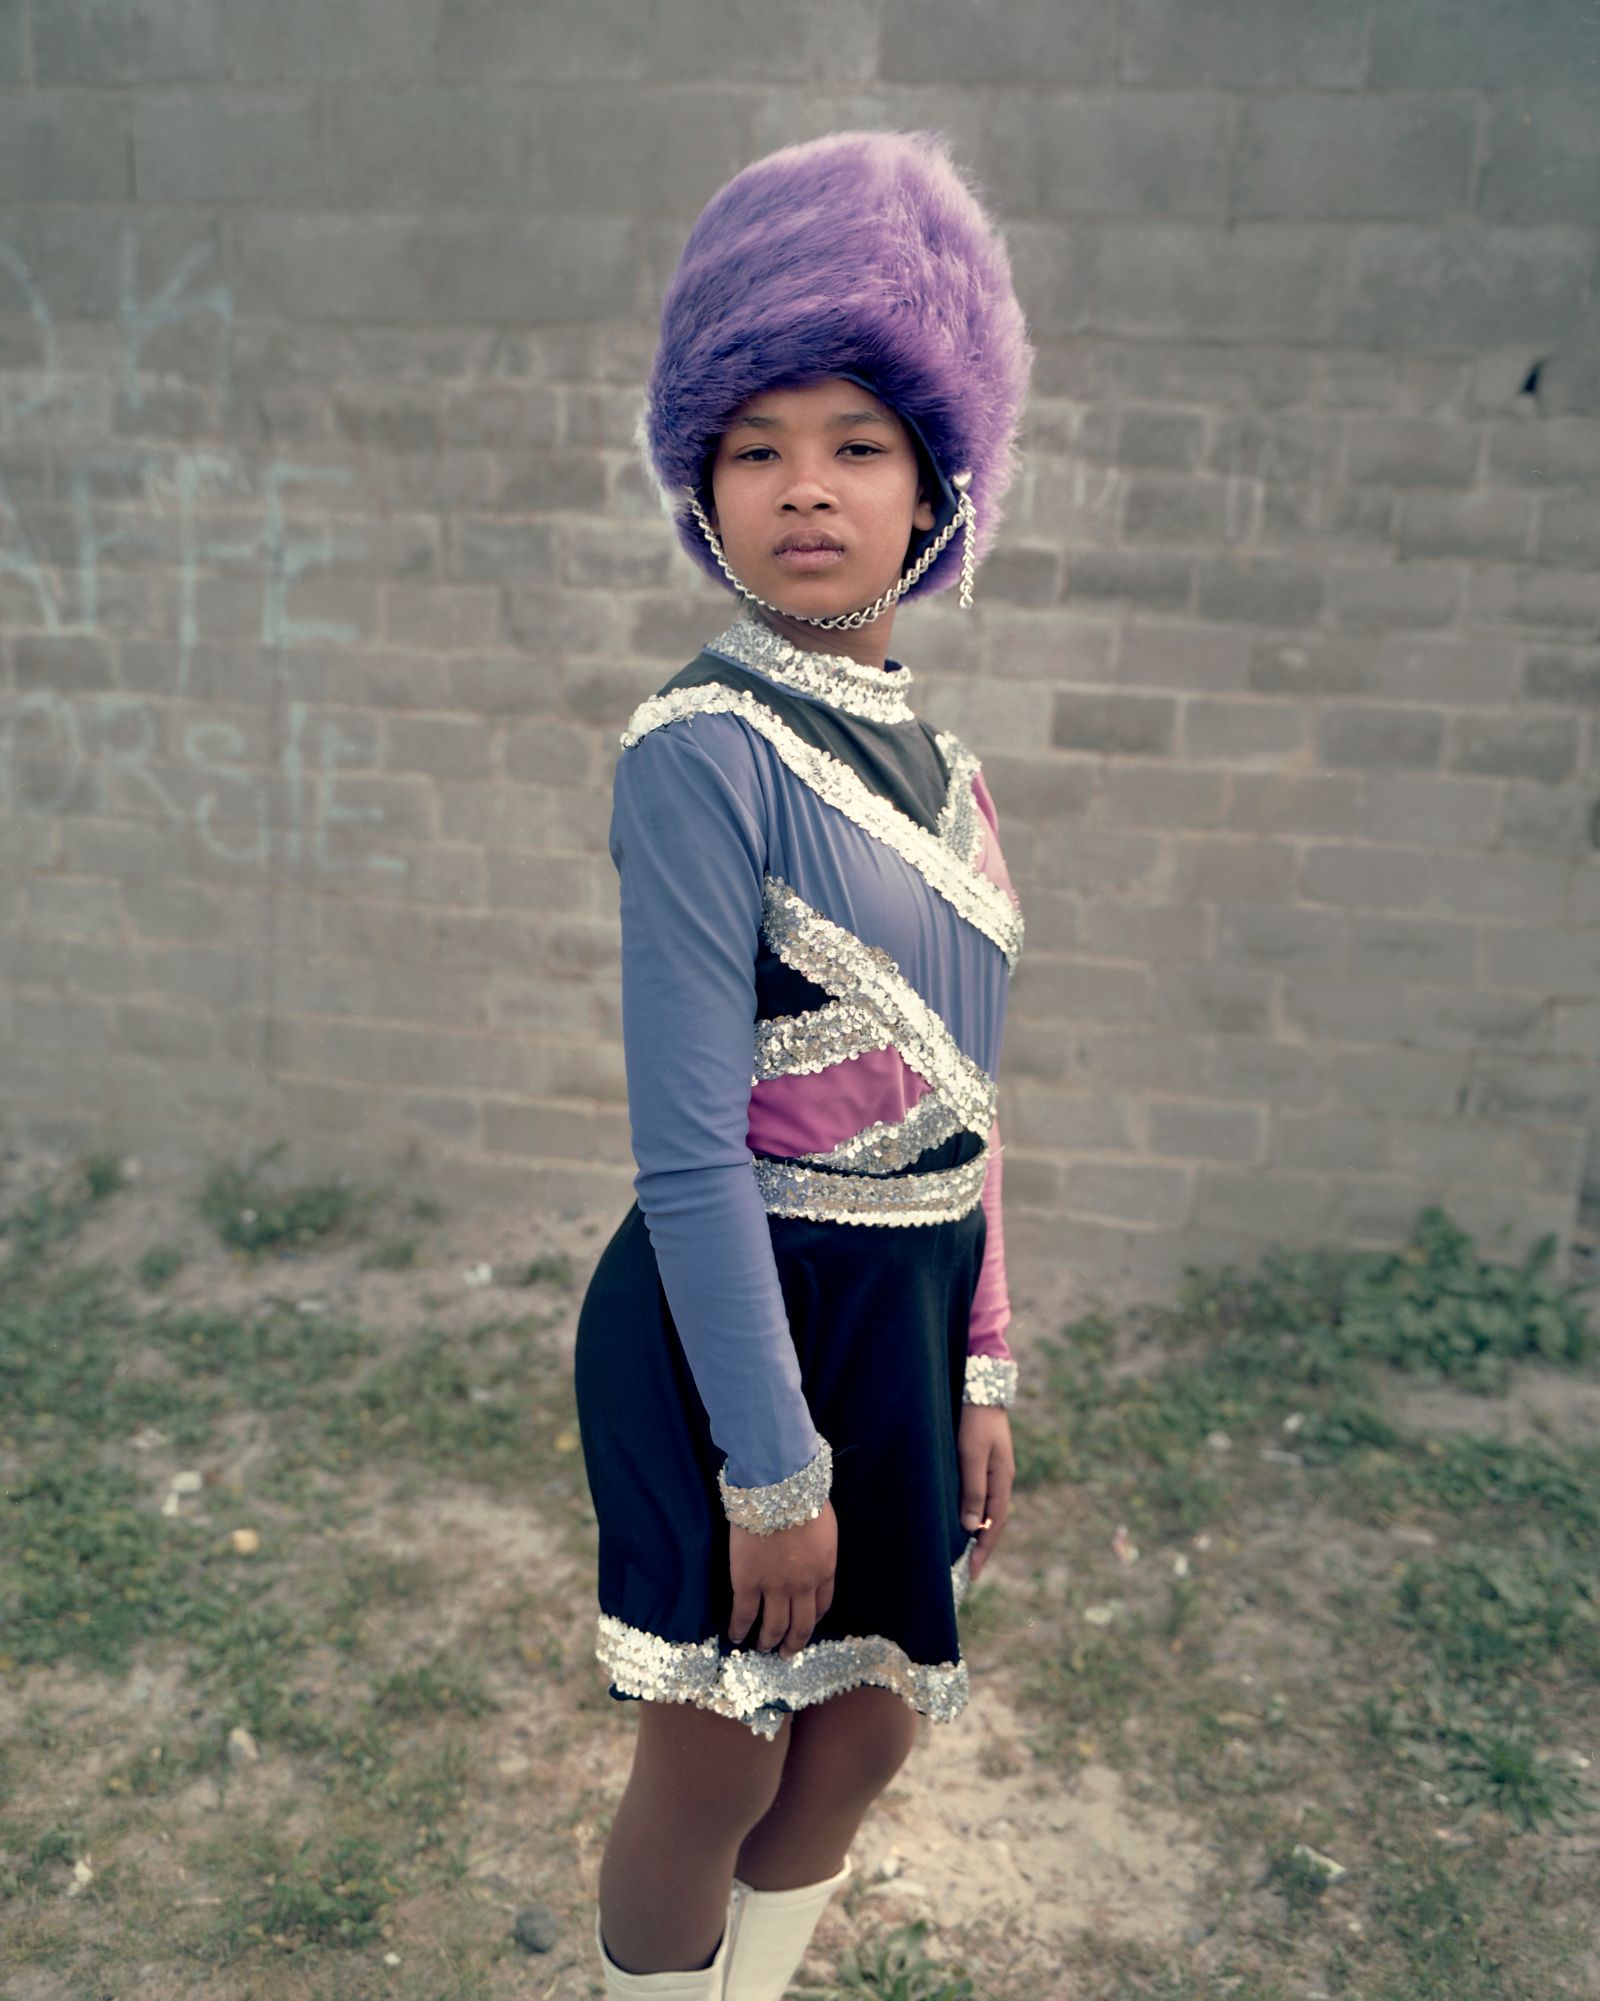 © alice mann - Tammy-Lee Banies, Cape Town, 2017. Tammy-Lee Banies is grade 6, and is one of the senior members of the team.